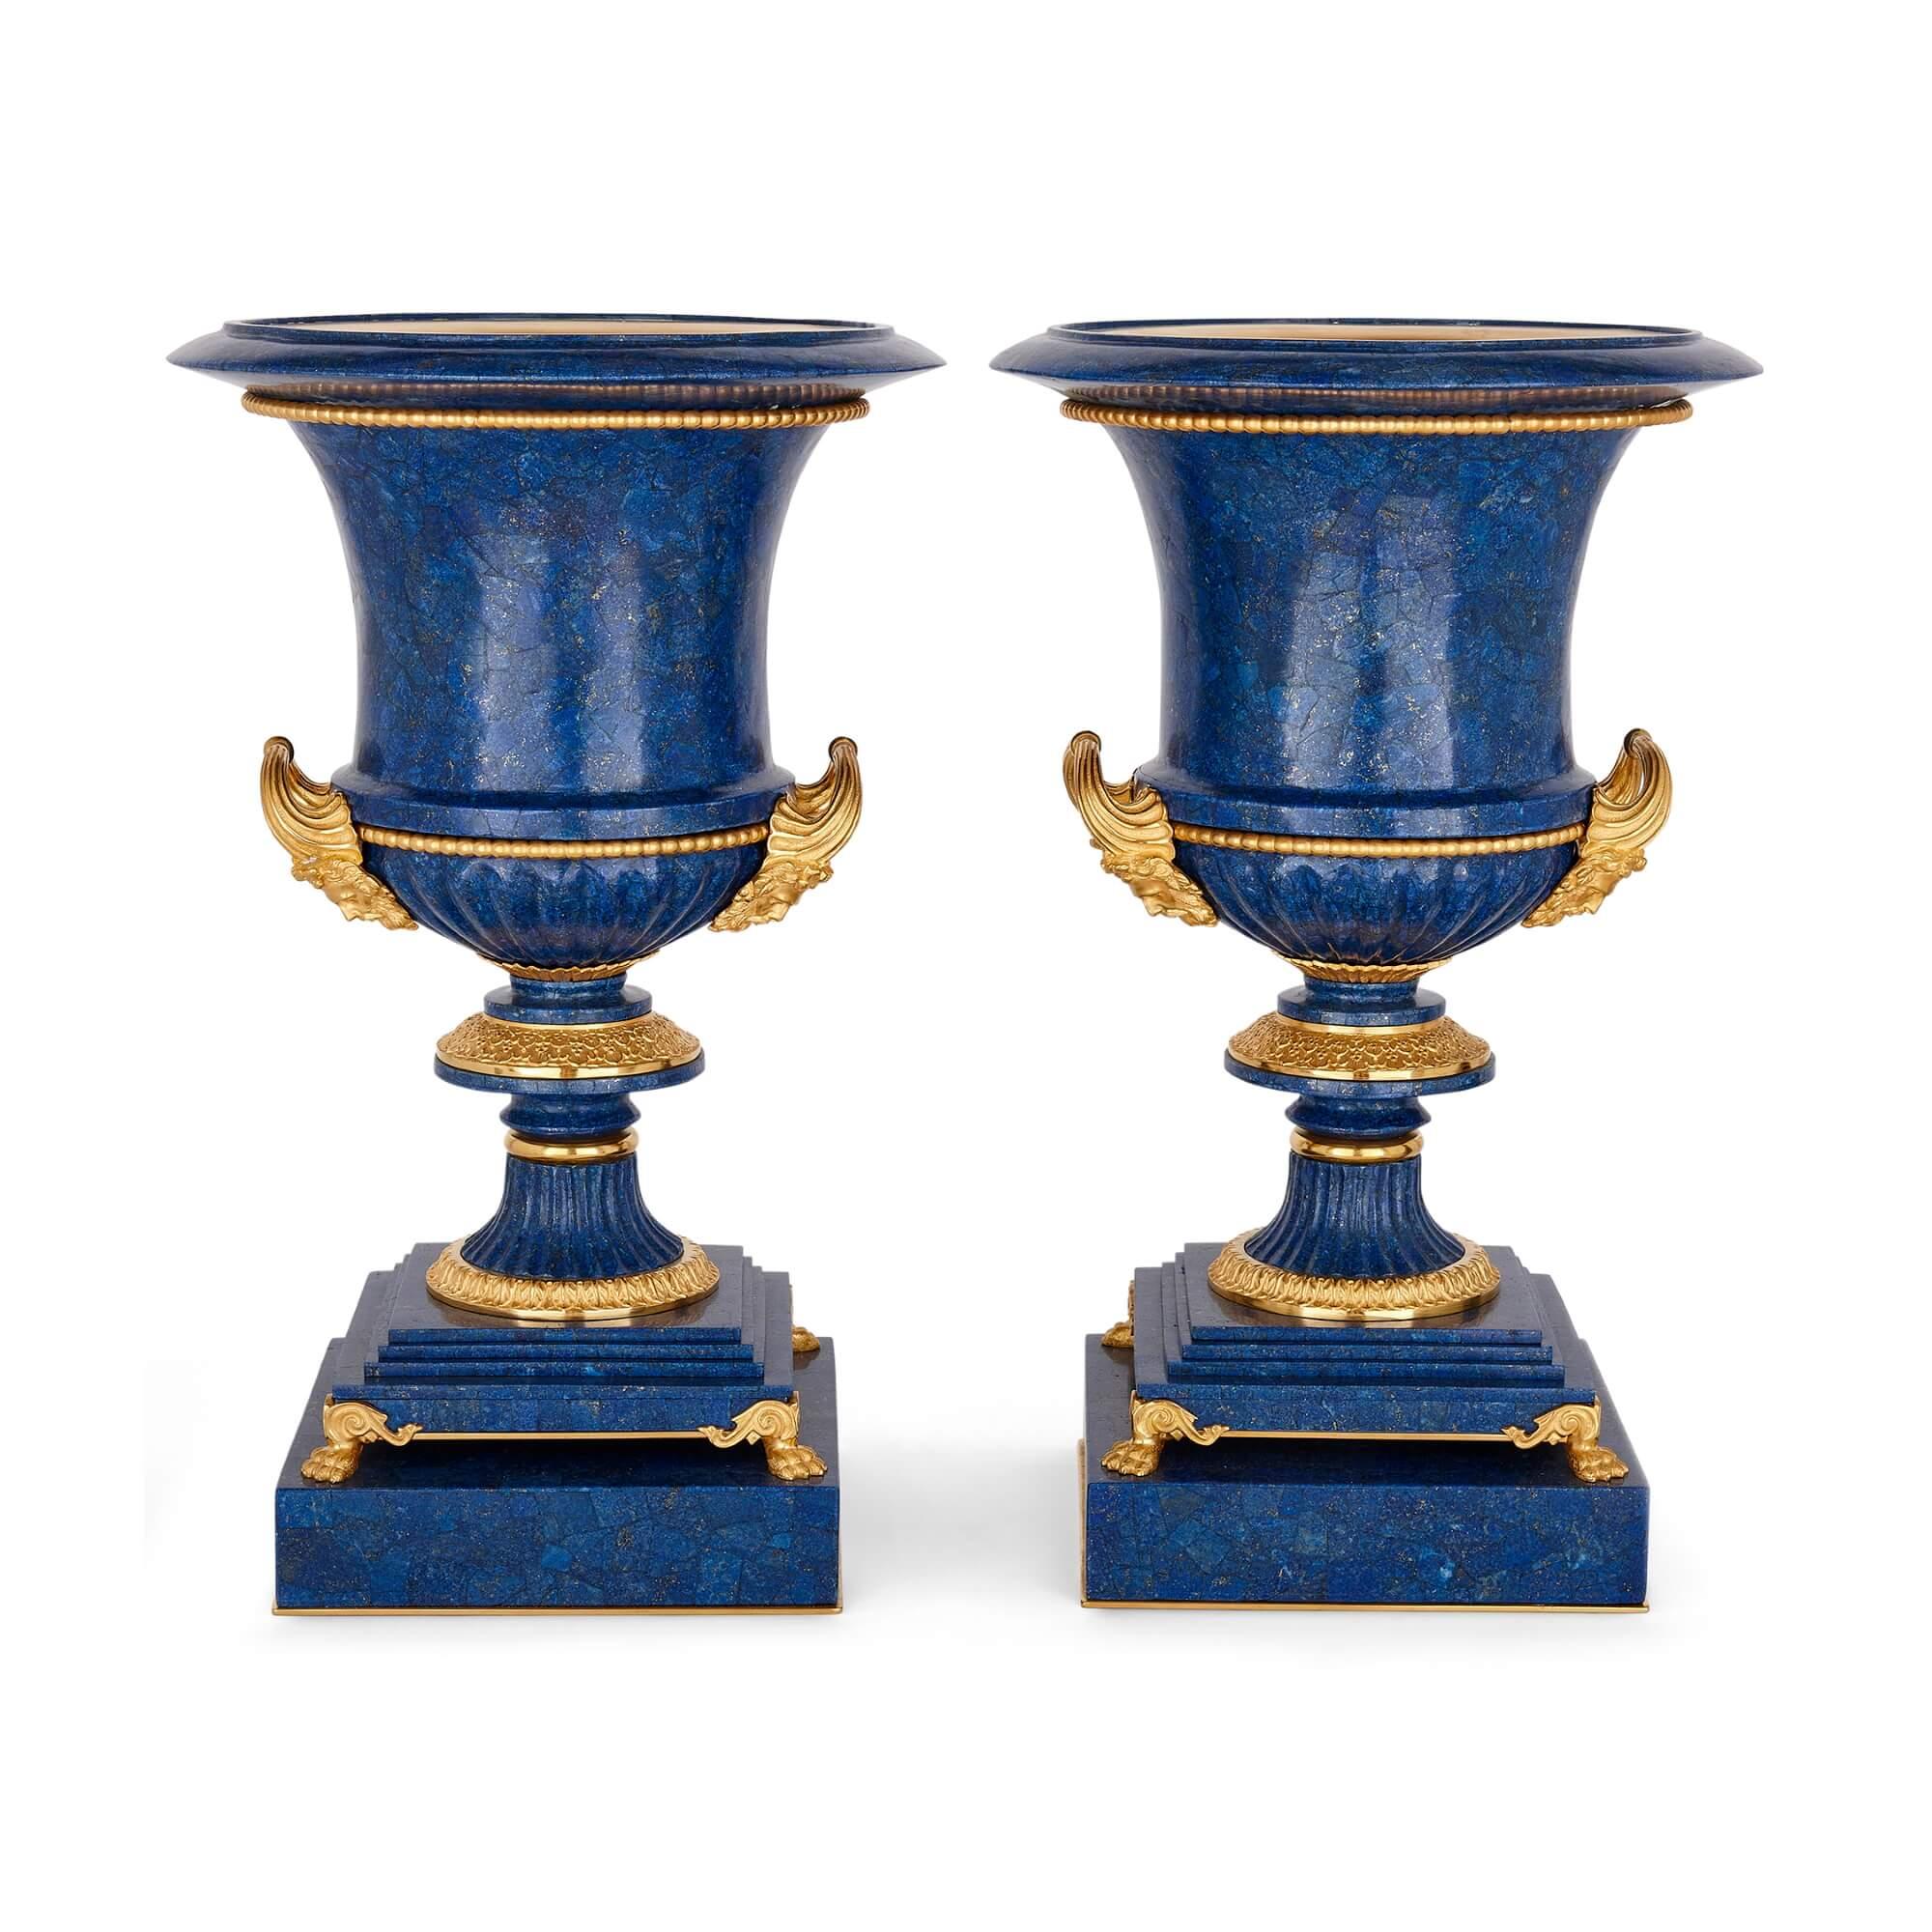 Pair of lapis lazuli and ormolu mounted 'Medici' vases after Galberg
French, 20th Century
Height 52cm, diameter 32.5cm

These stunning vases are made from lapis lazuli and ormolu: an exceptional and precious combination of materials, appropriate for